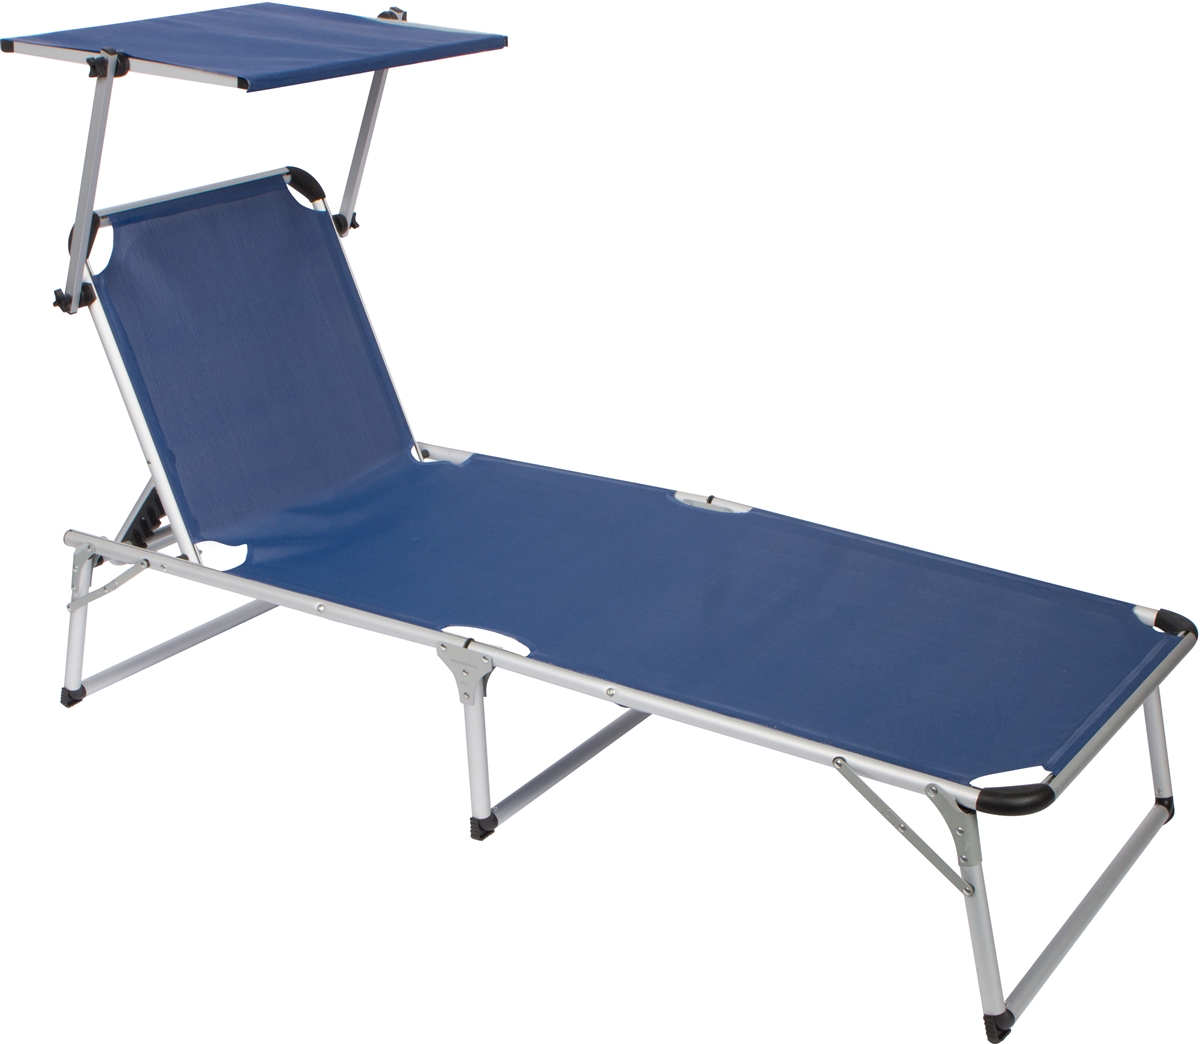 Favoroutdoor Adjustable Beach And Patio Lounge Chair With Sun Shade